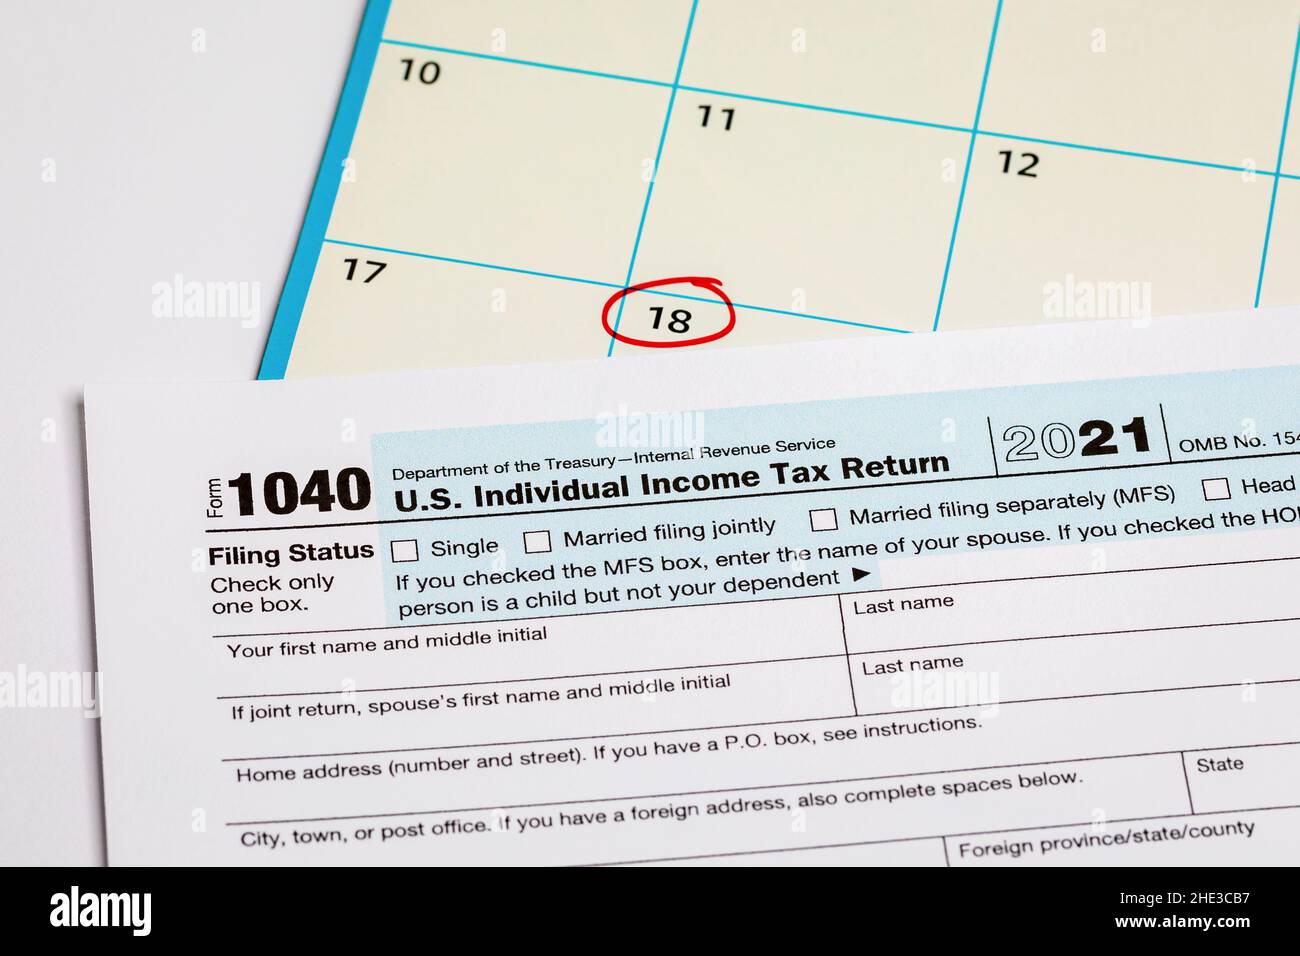 Income tax return form and calendar with filing deadline date. April 18 tax due date, financial information Stock Photo